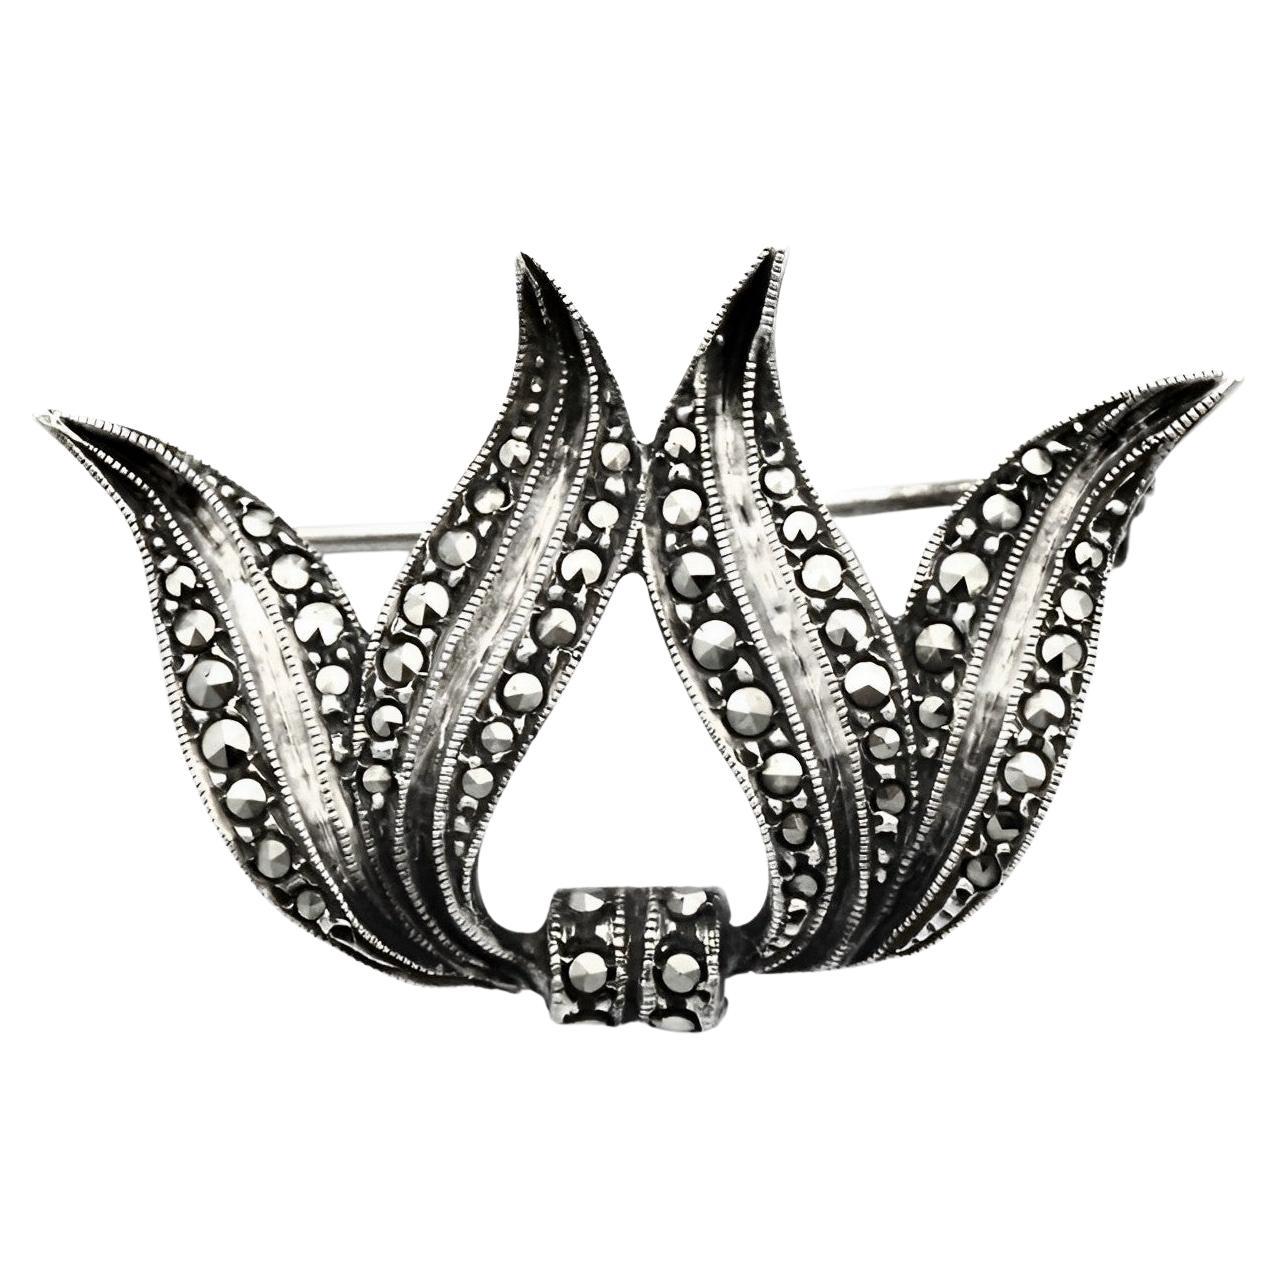 Silver and Marcasite Double Leaf Brooch circa 1930s